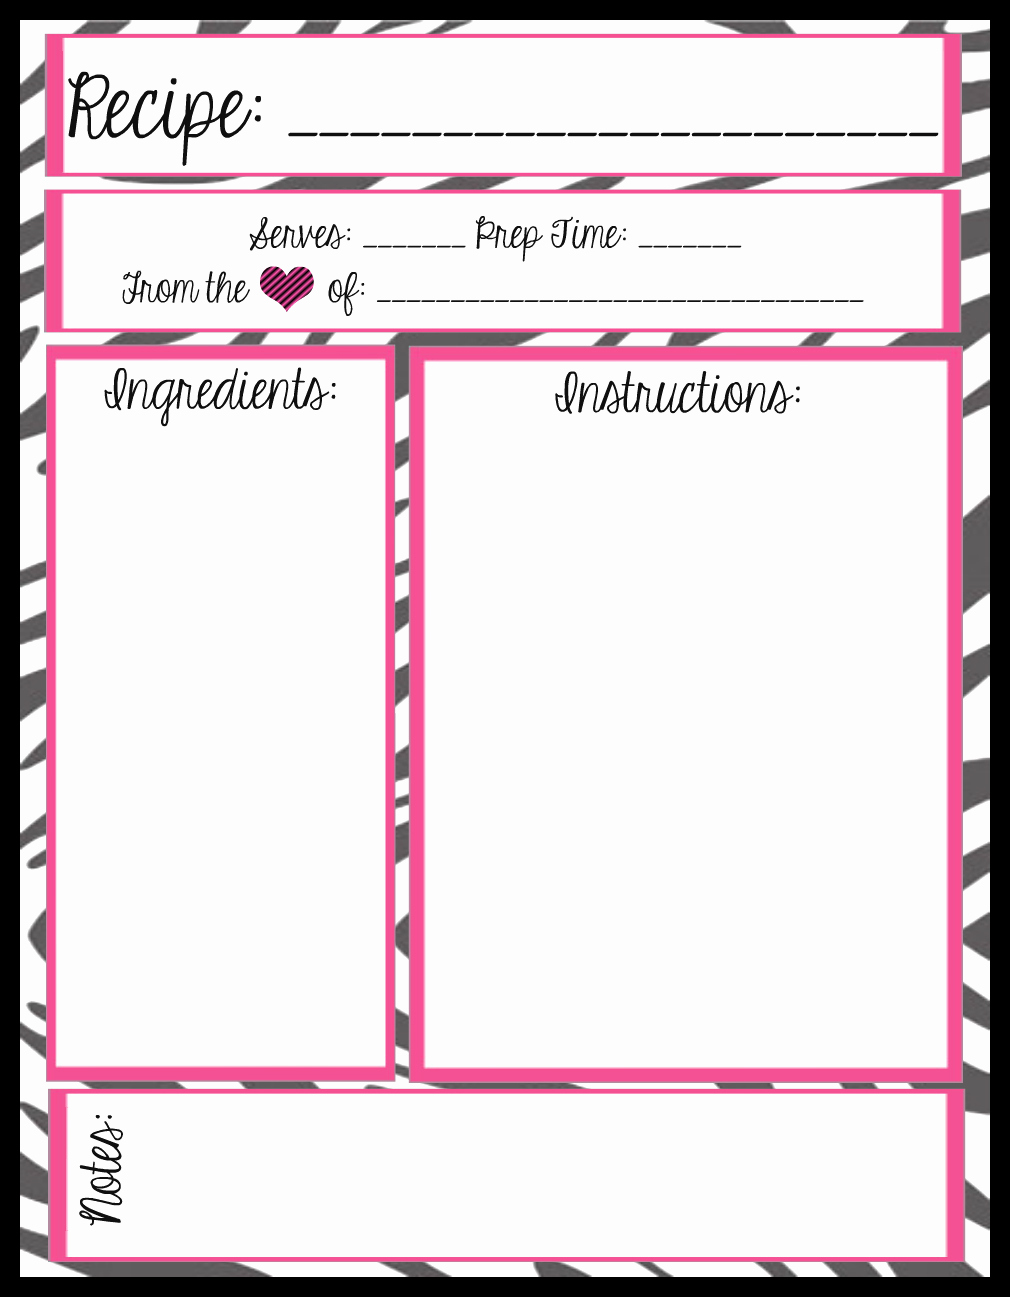 Free Printable Recipe Pages Inspirational Mesa S Place Full Page Recipe Templates [free Printables]